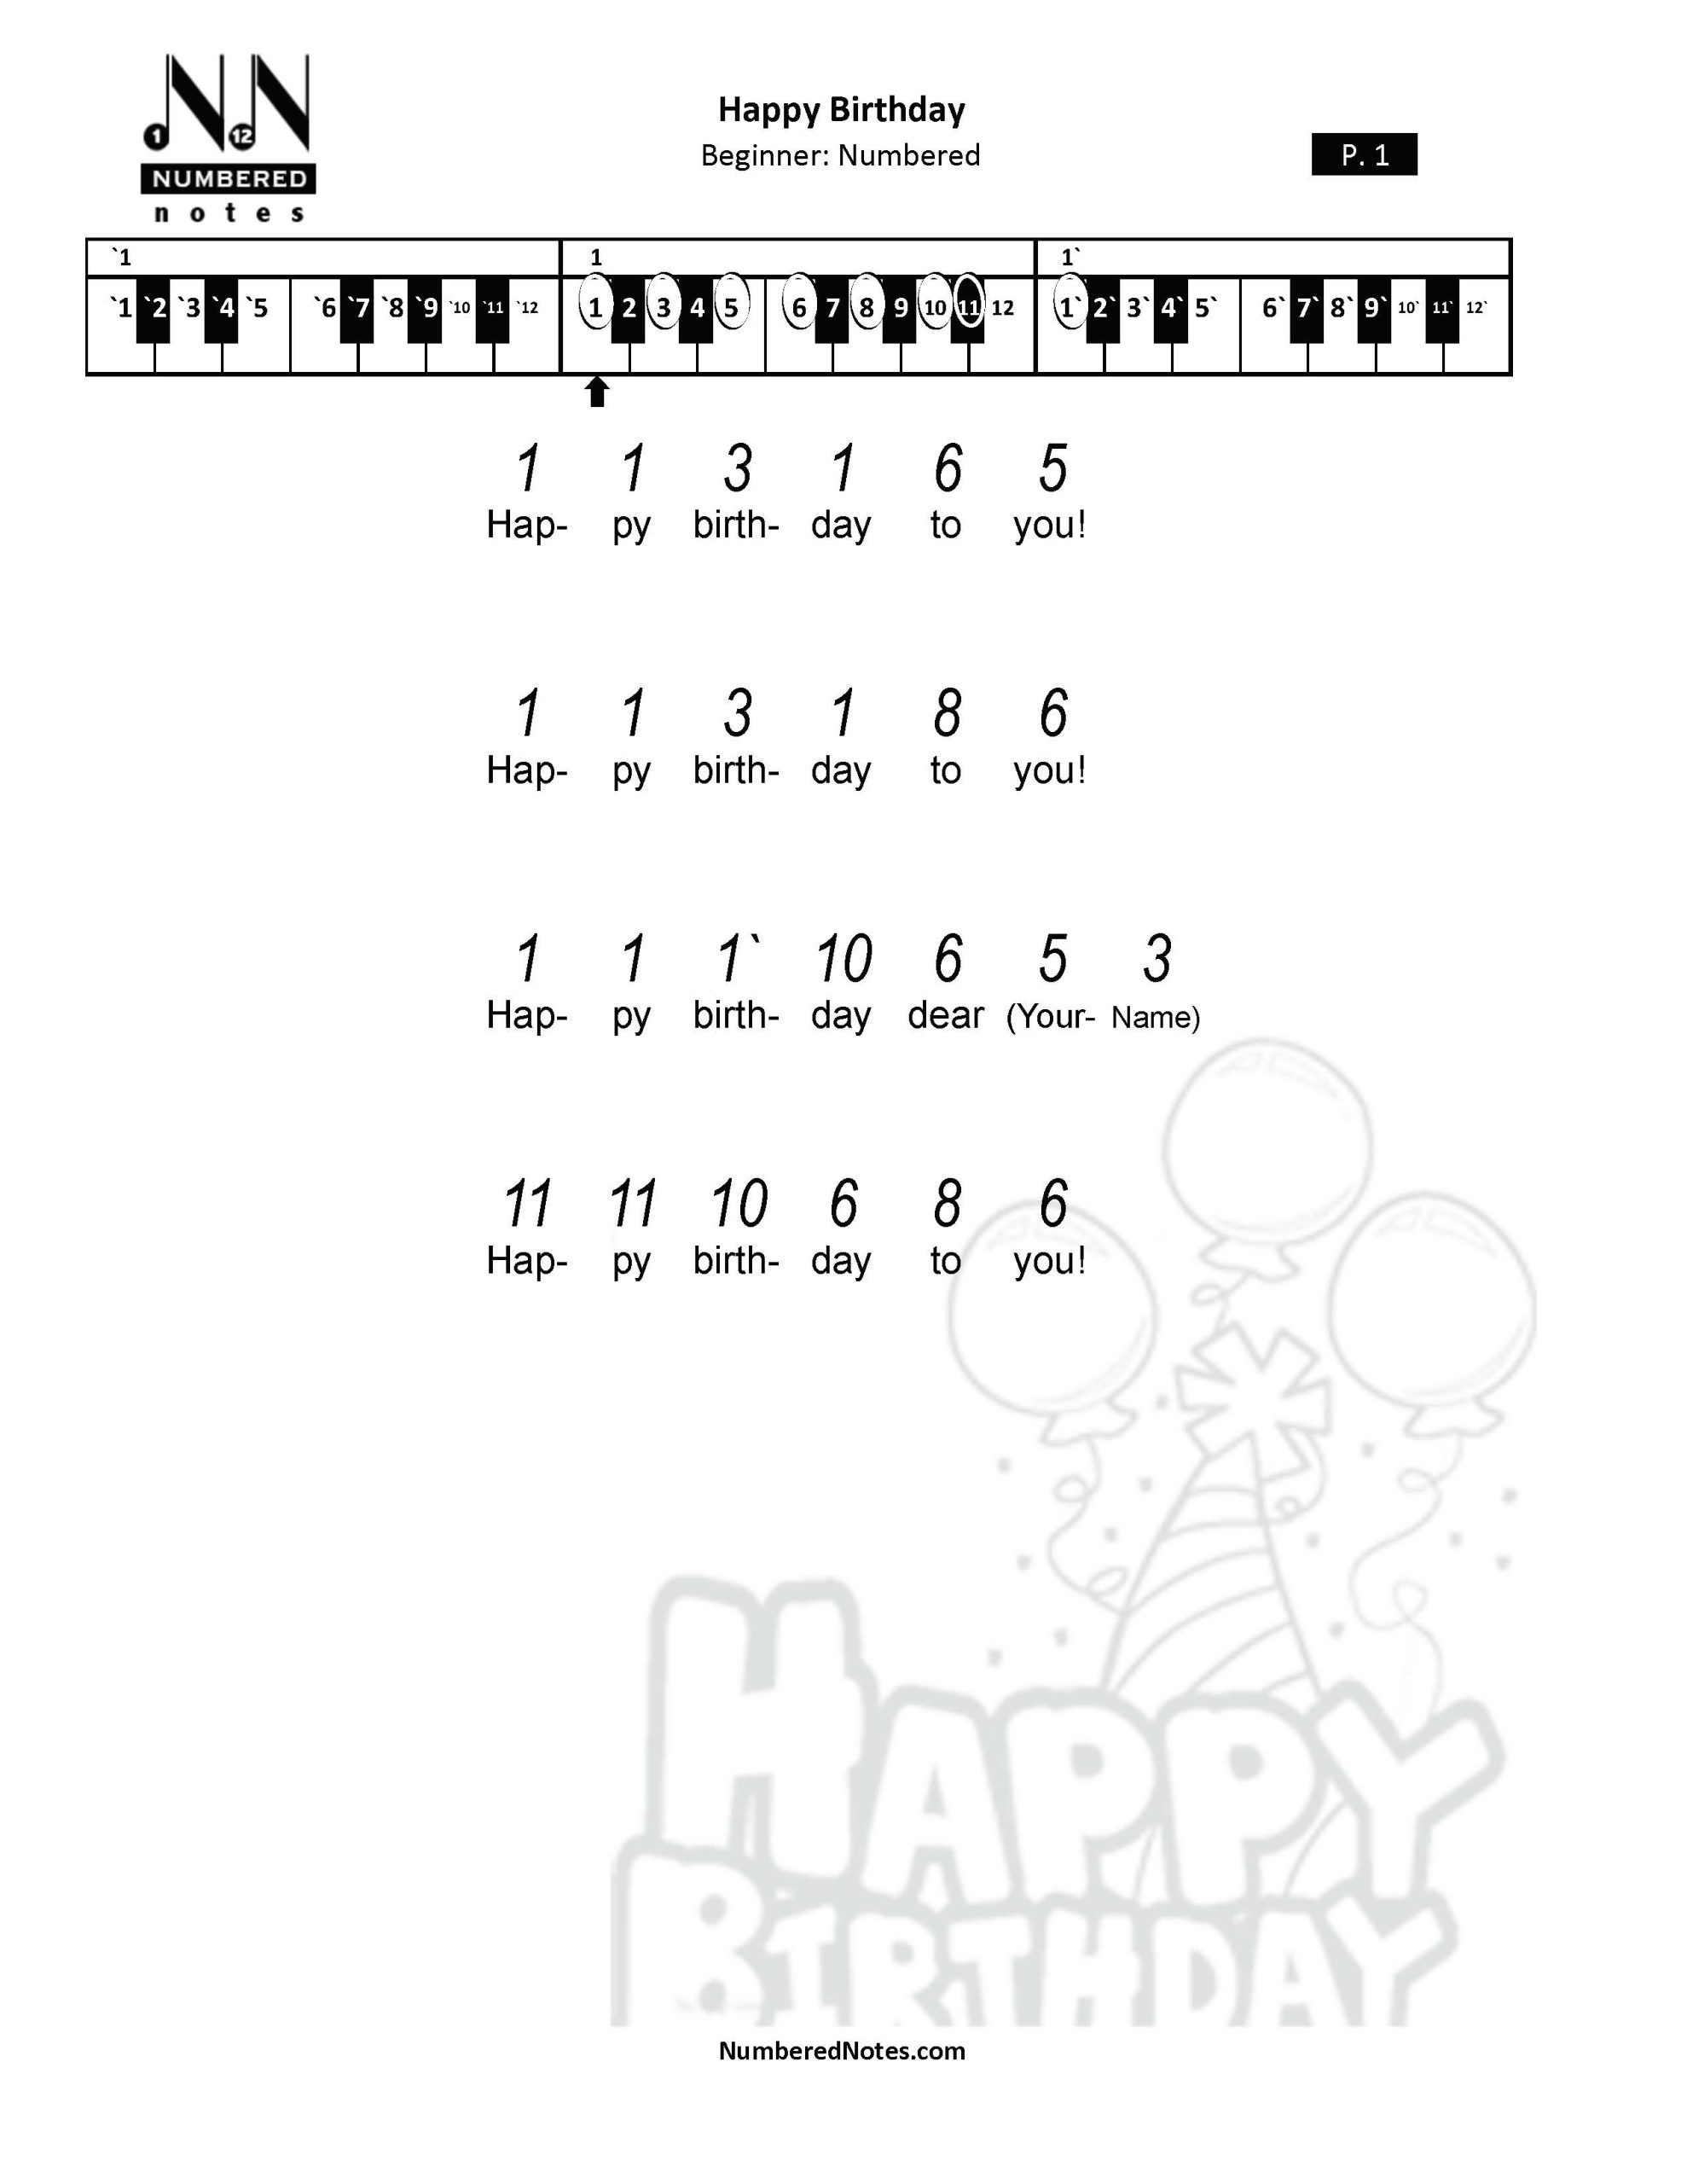 Happy Birthday - Numbered Notes™ - Sheet Music